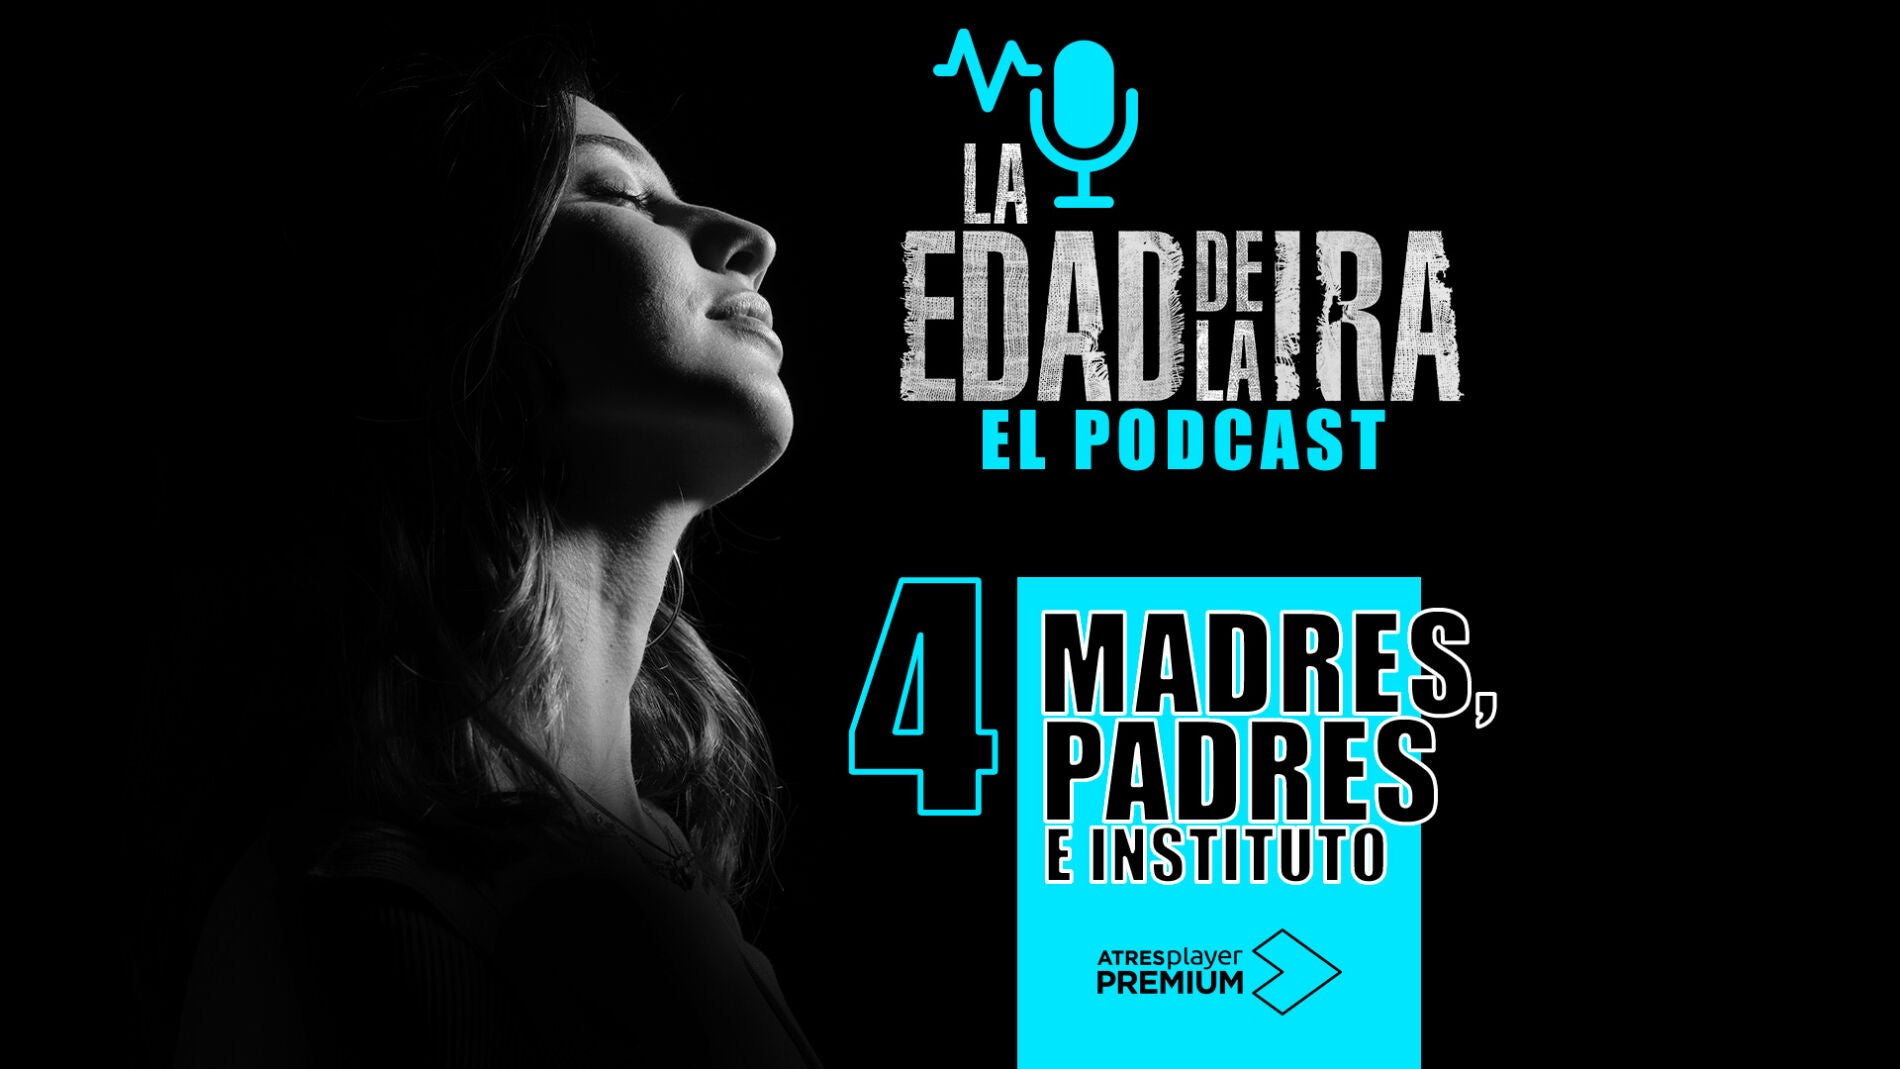 Madres, padres e instituto 